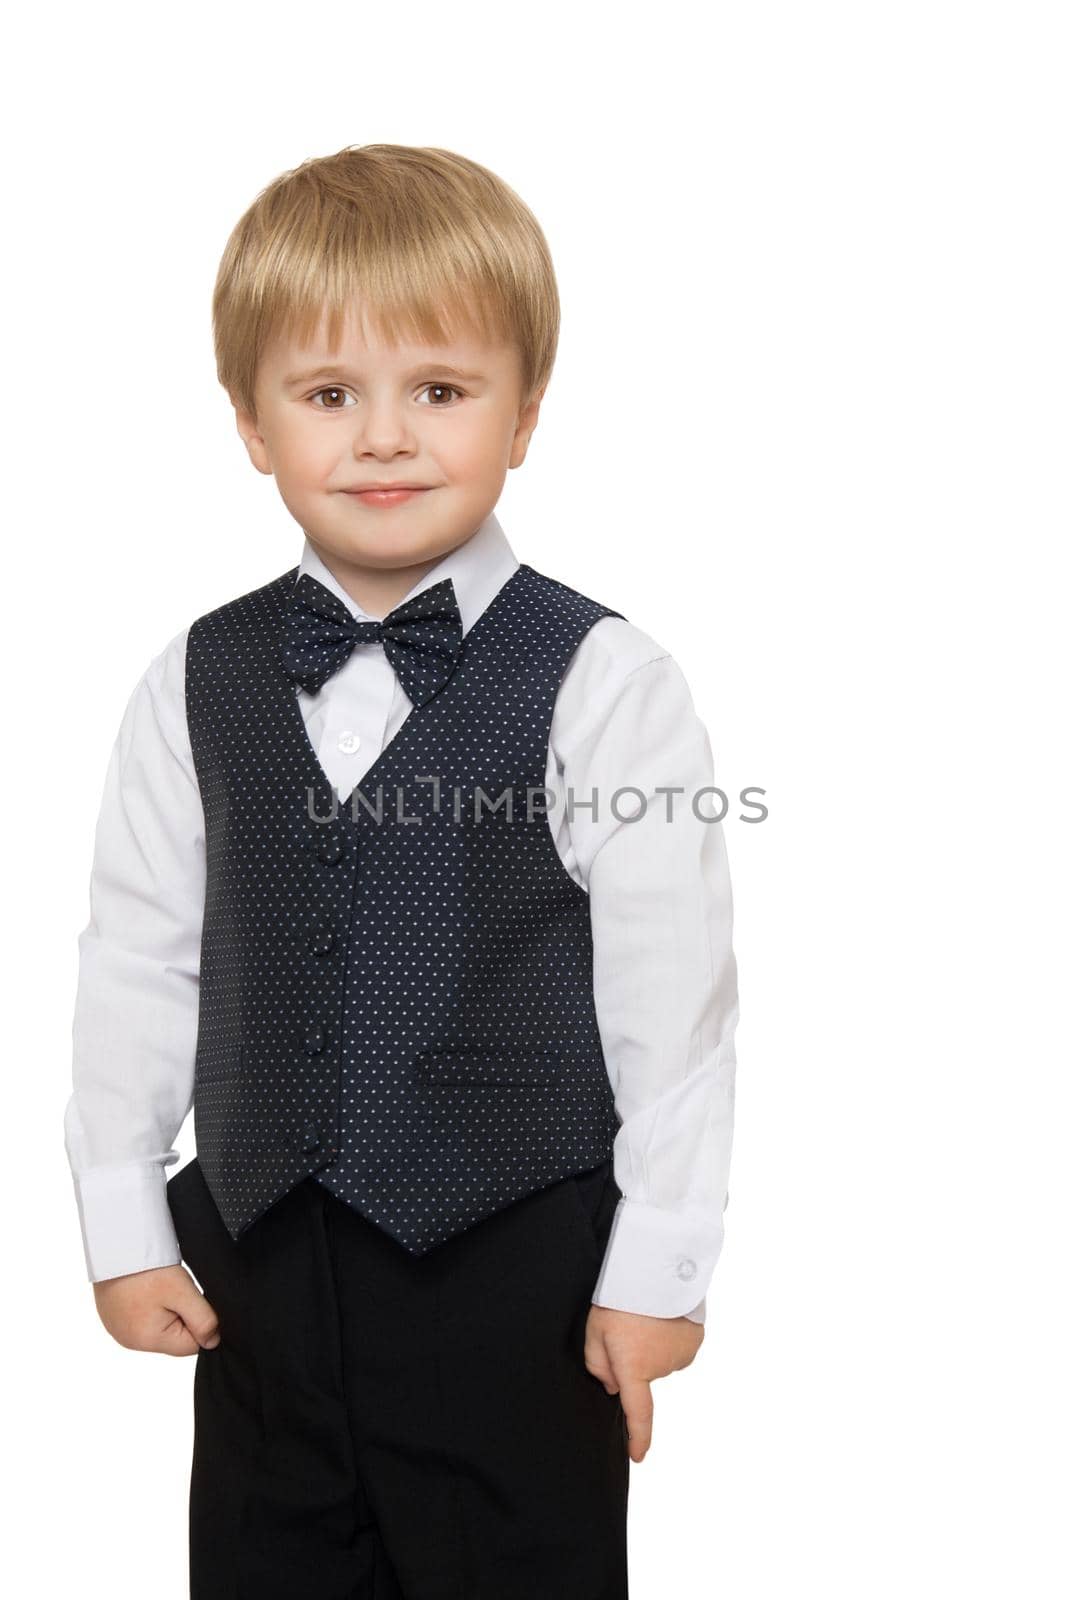 Cute little boy in white shirt, vest and bow tie- Isolated on white background